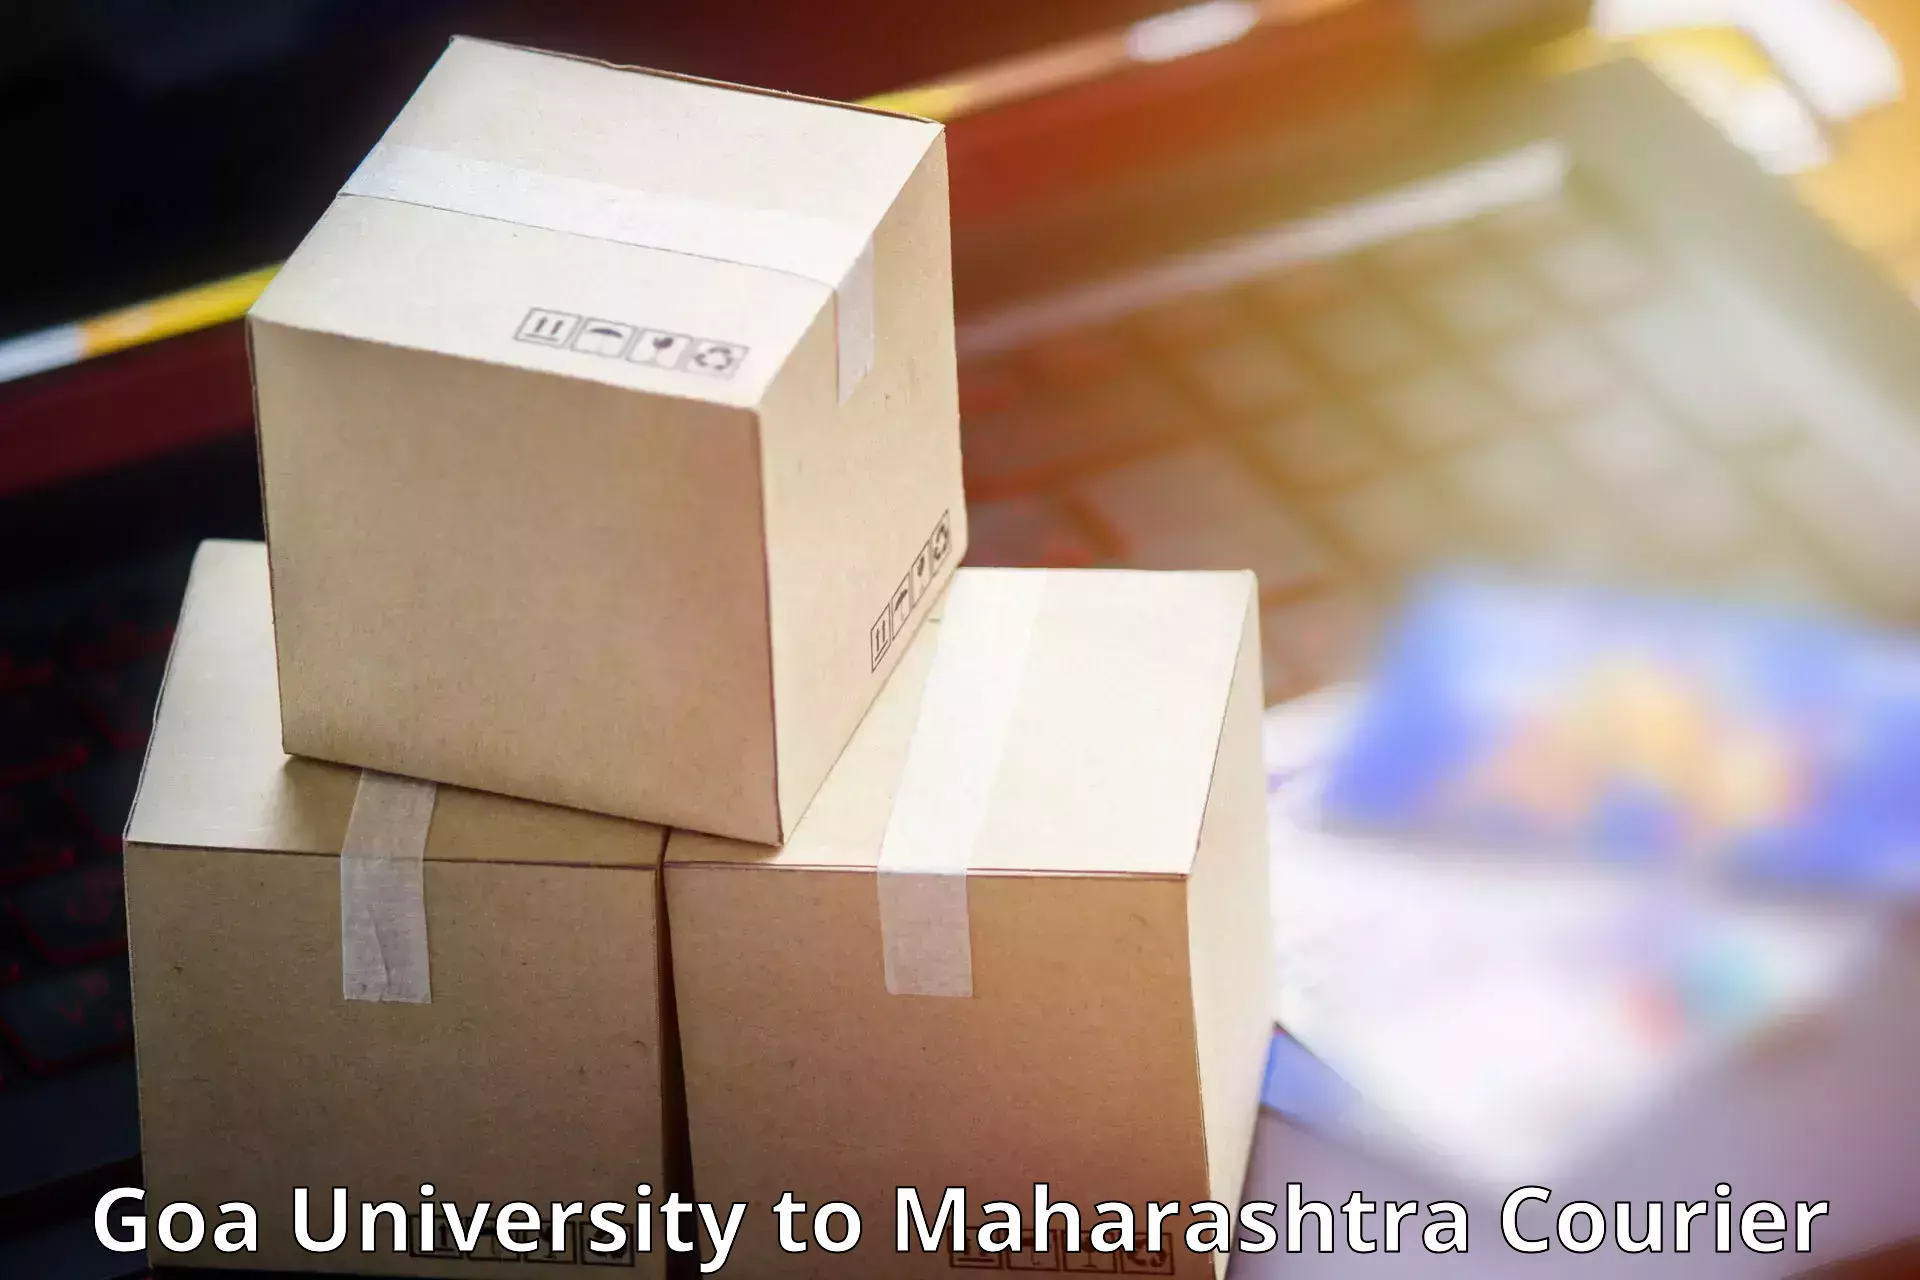 Global courier networks Goa University to Chinchbunder